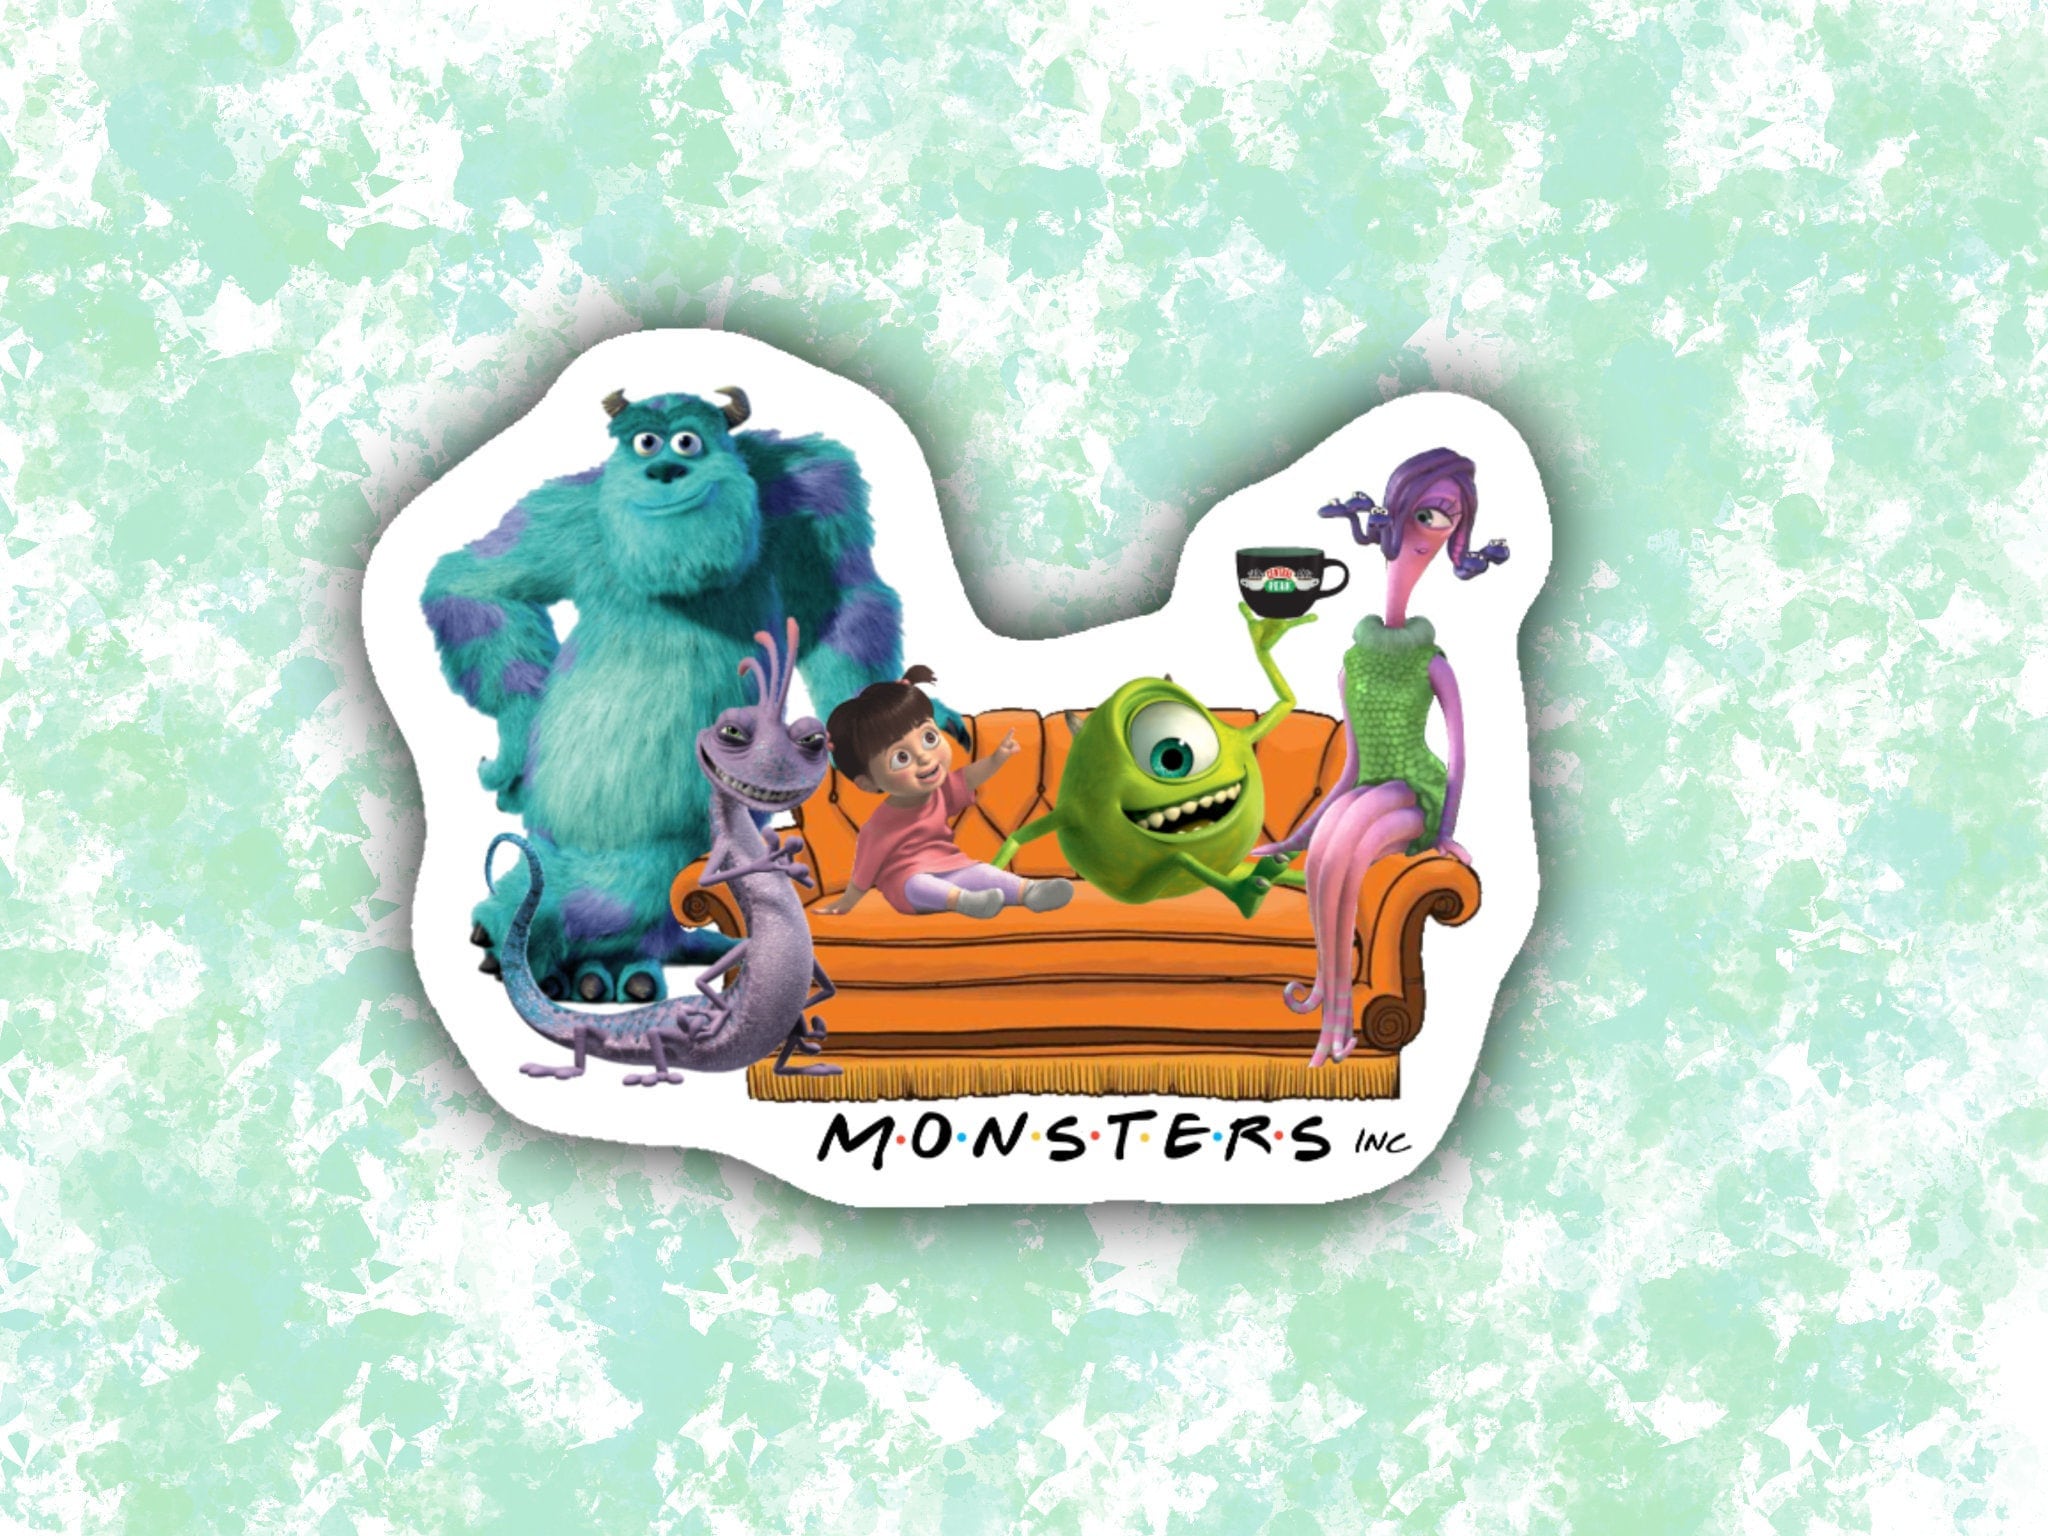 Disney Monsters Inc Sulley Kitty Color Chalk Graphic Sticker